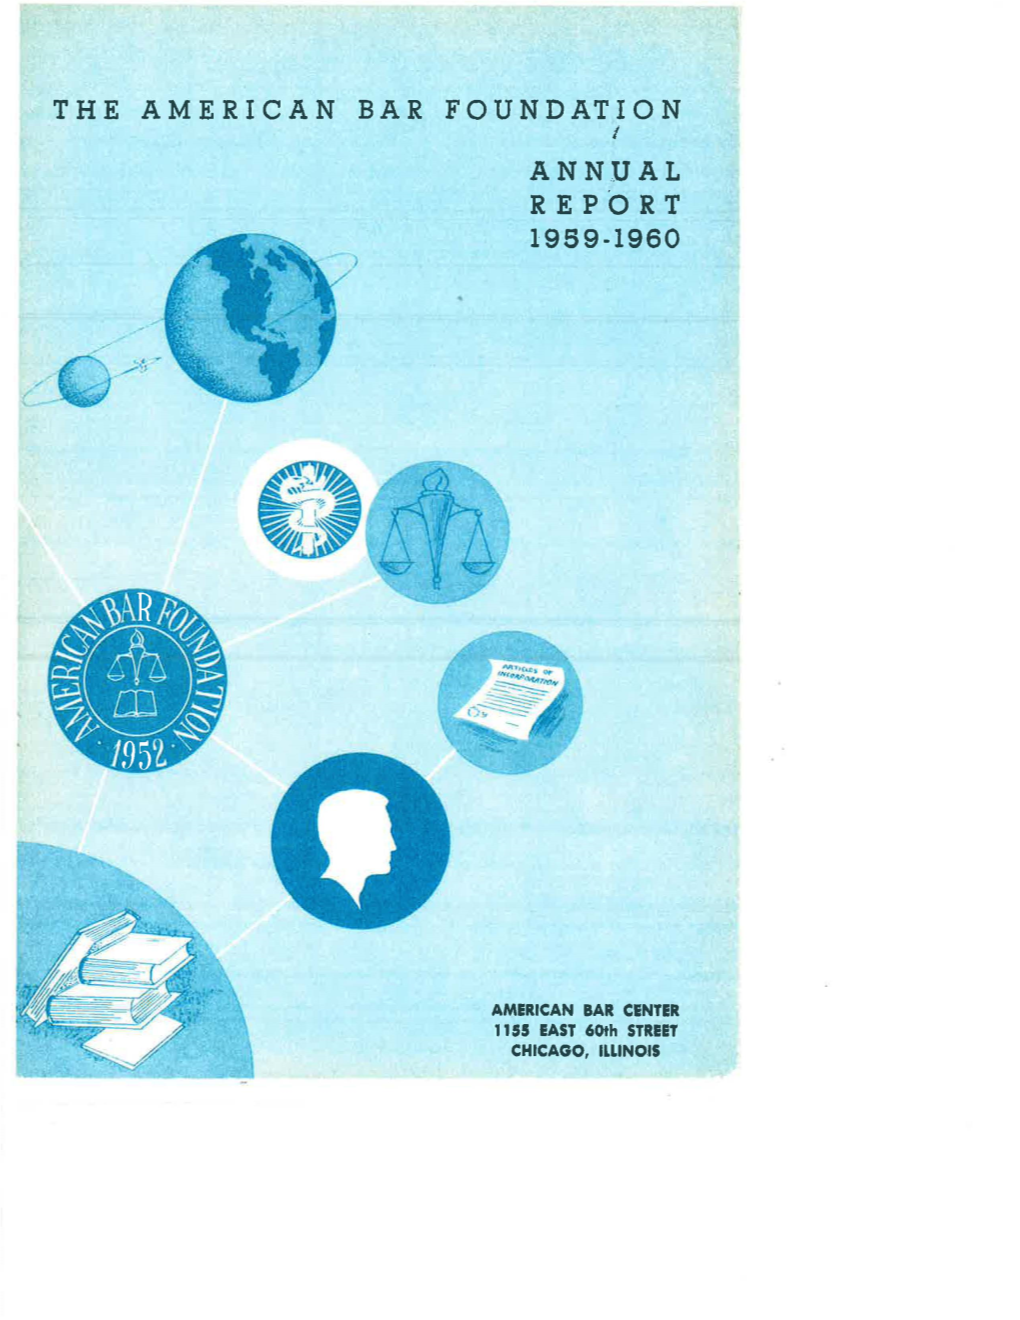 The American Bar Foundation Annual Report 1969-1960